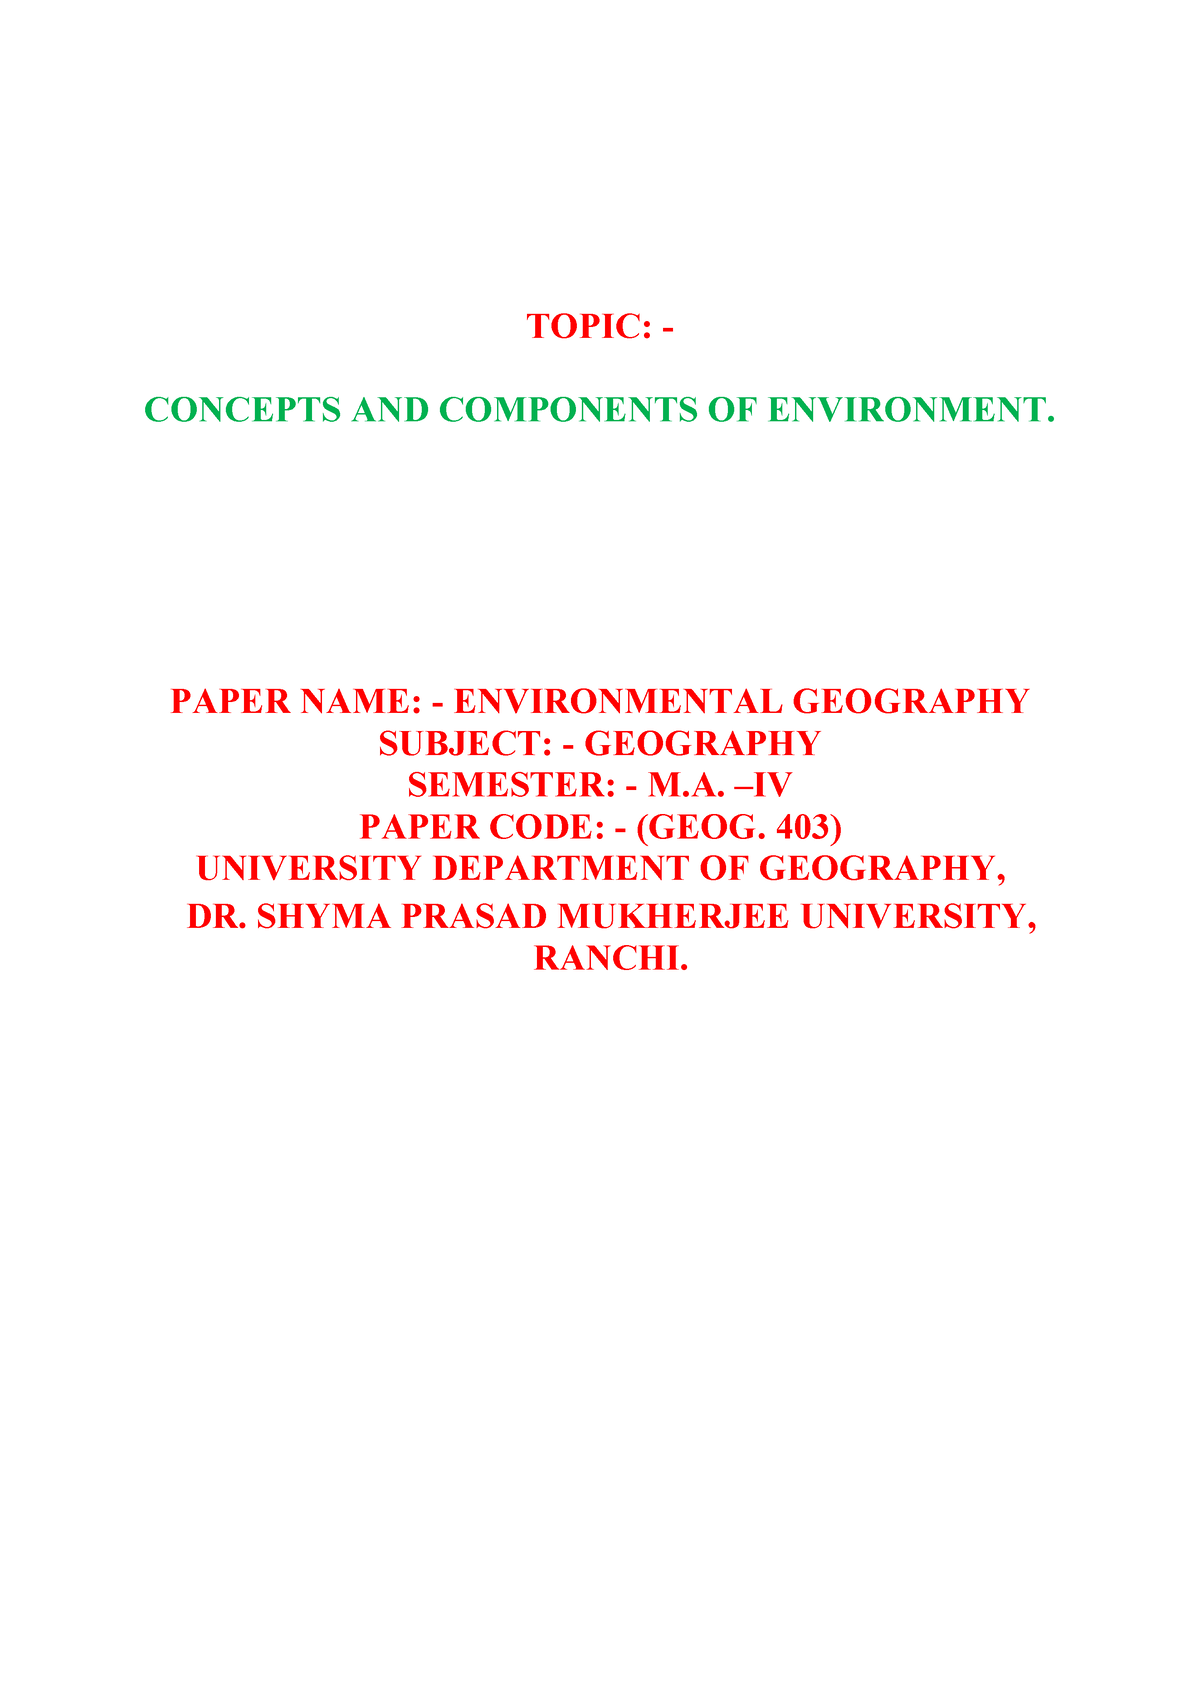 Satyapriya 52dspmucom S 12 - TOPIC: - CONCEPTS AND COMPONENTS OF ...